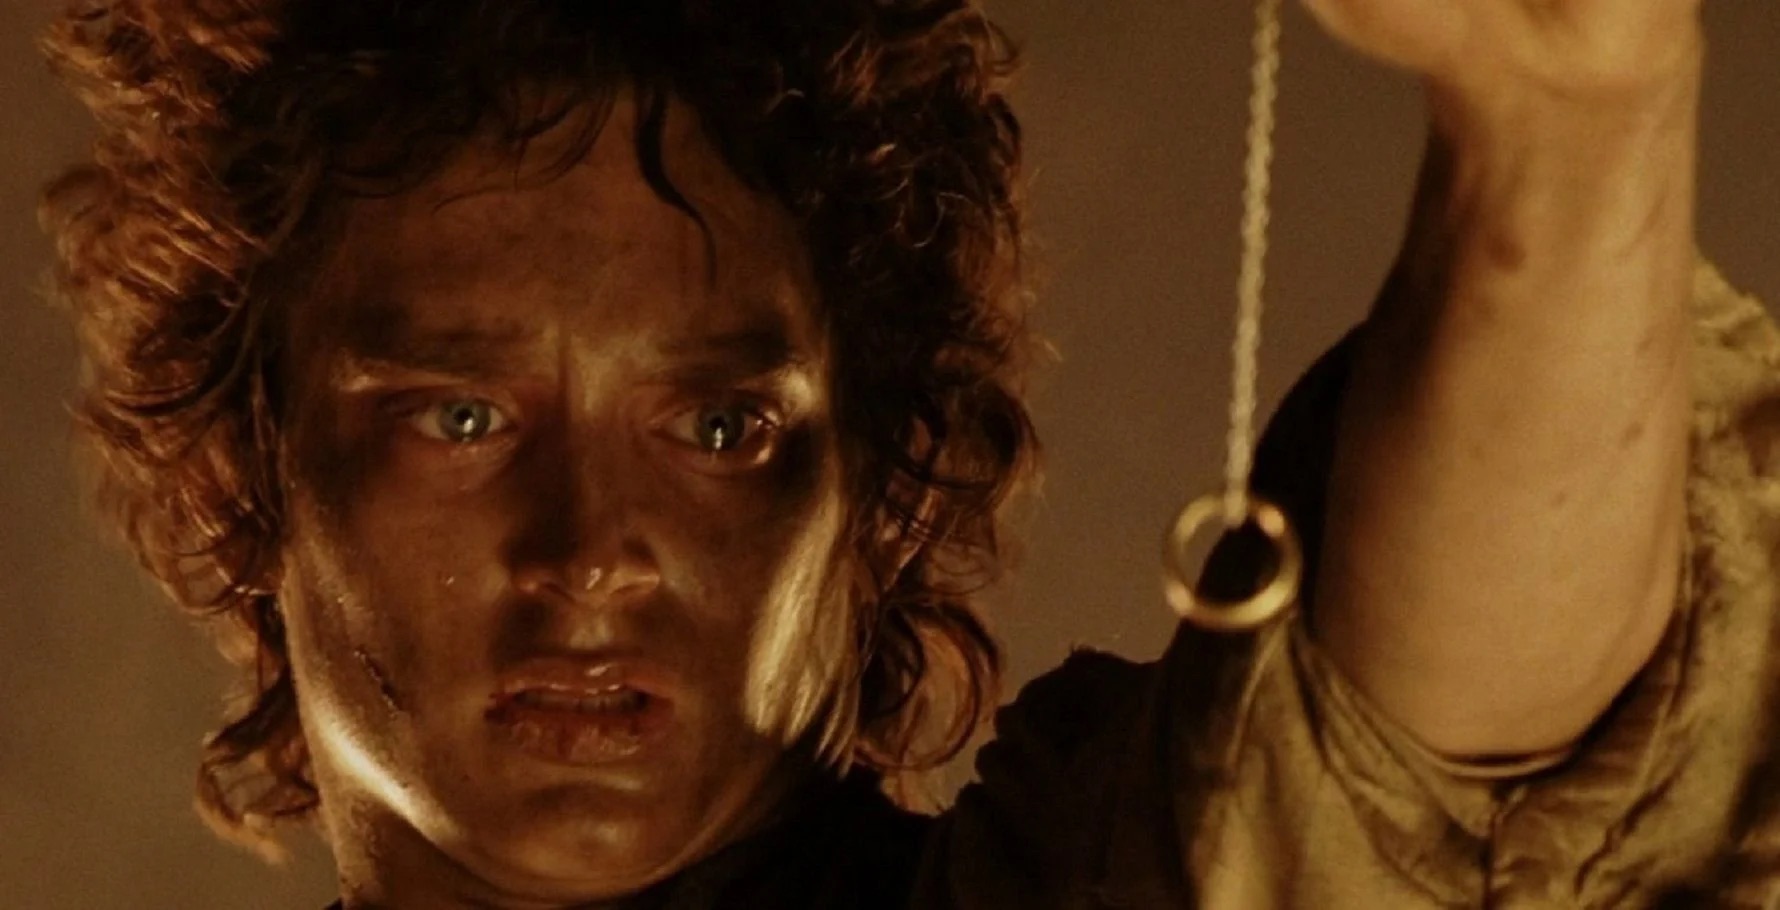 Elijah Wood as Frodo trying to destroy the One Ring in The Lord of the Rings movie